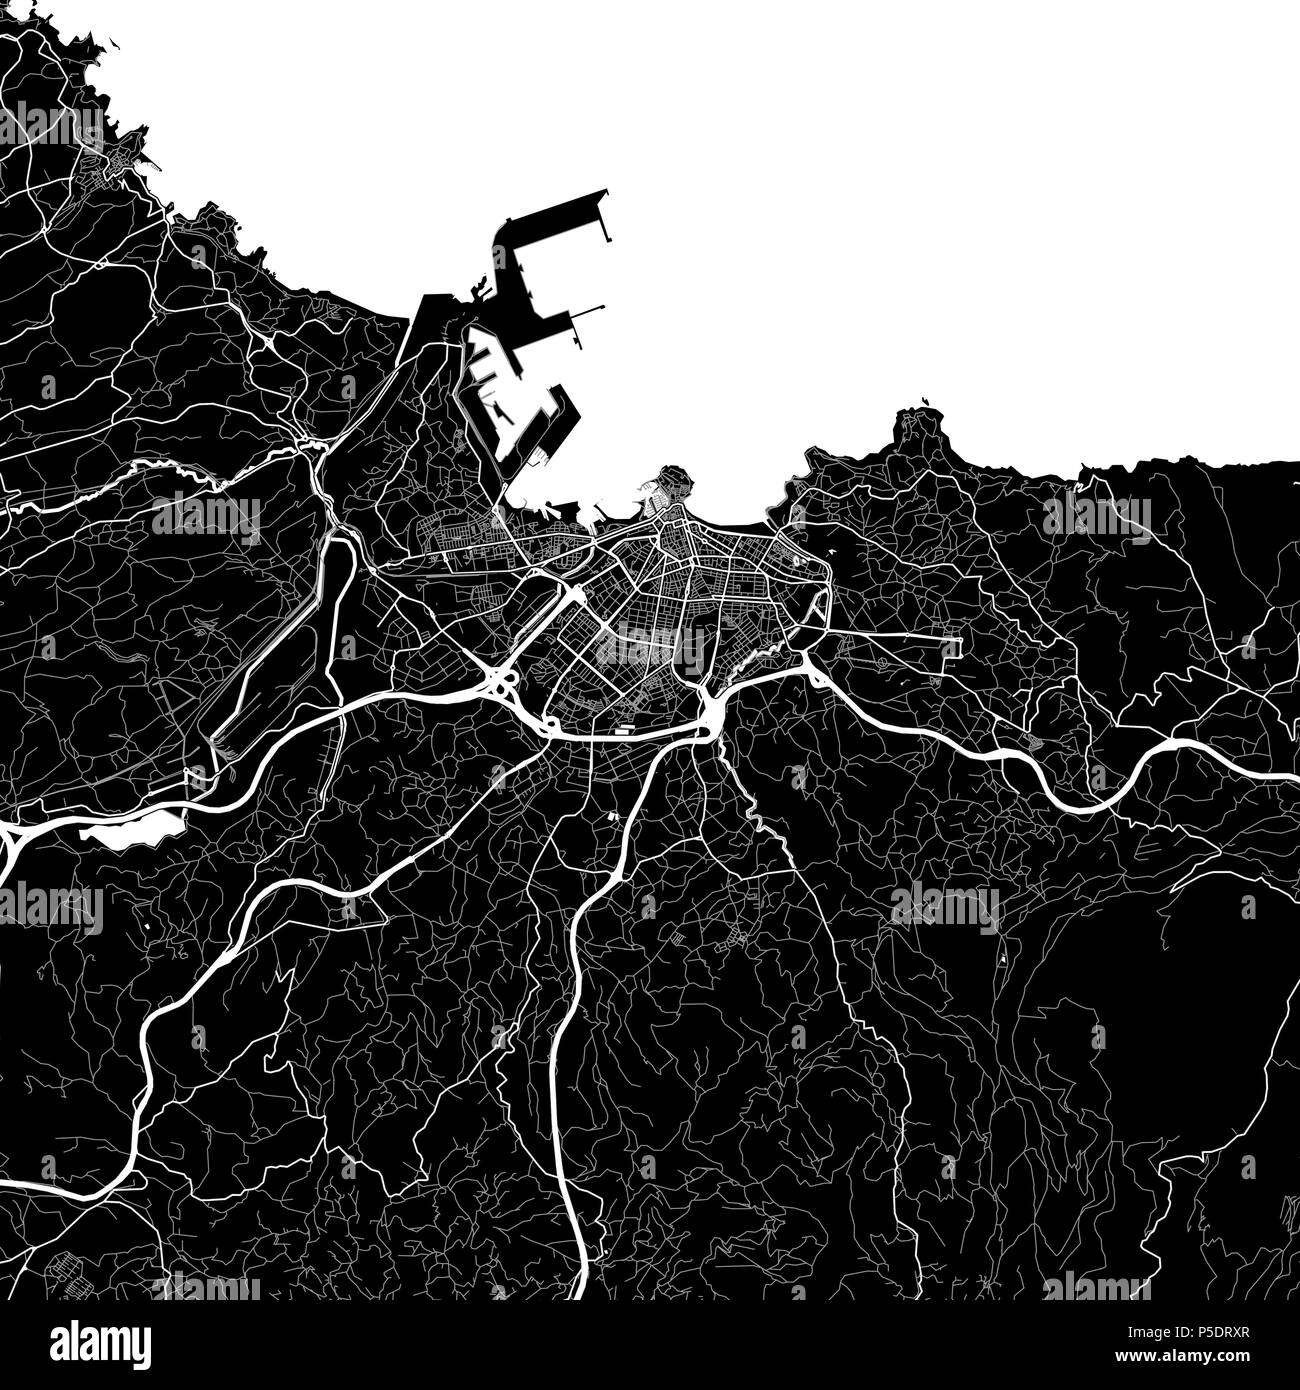 Area map of Gijón, Spain. Dark background version for infographic and marketing projects. This map of Gijón contains typical landmarks with streets, w Stock Vector